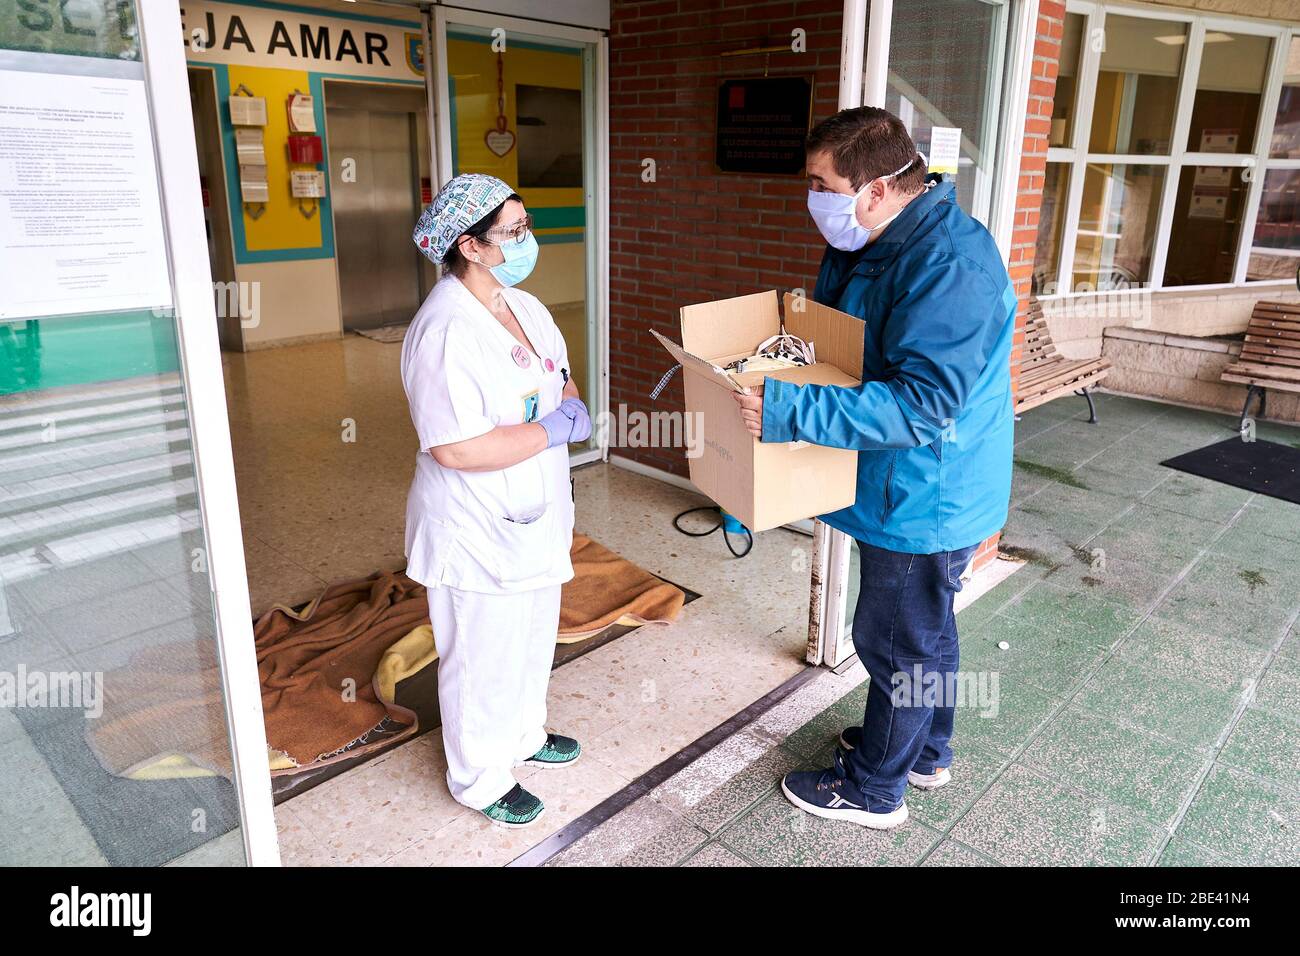 Mostoles, Madrid, Spain. 9th Apr, 2020. Juan XXIII nursing home staff receive face masks used as a preventive measure against covid 19, donated by Ntra. Sra. del Rocio brotherhood during the coronavirus outbreak. Credit: Legan P. Mace/SOPA Images/ZUMA Wire/Alamy Live News Stock Photo